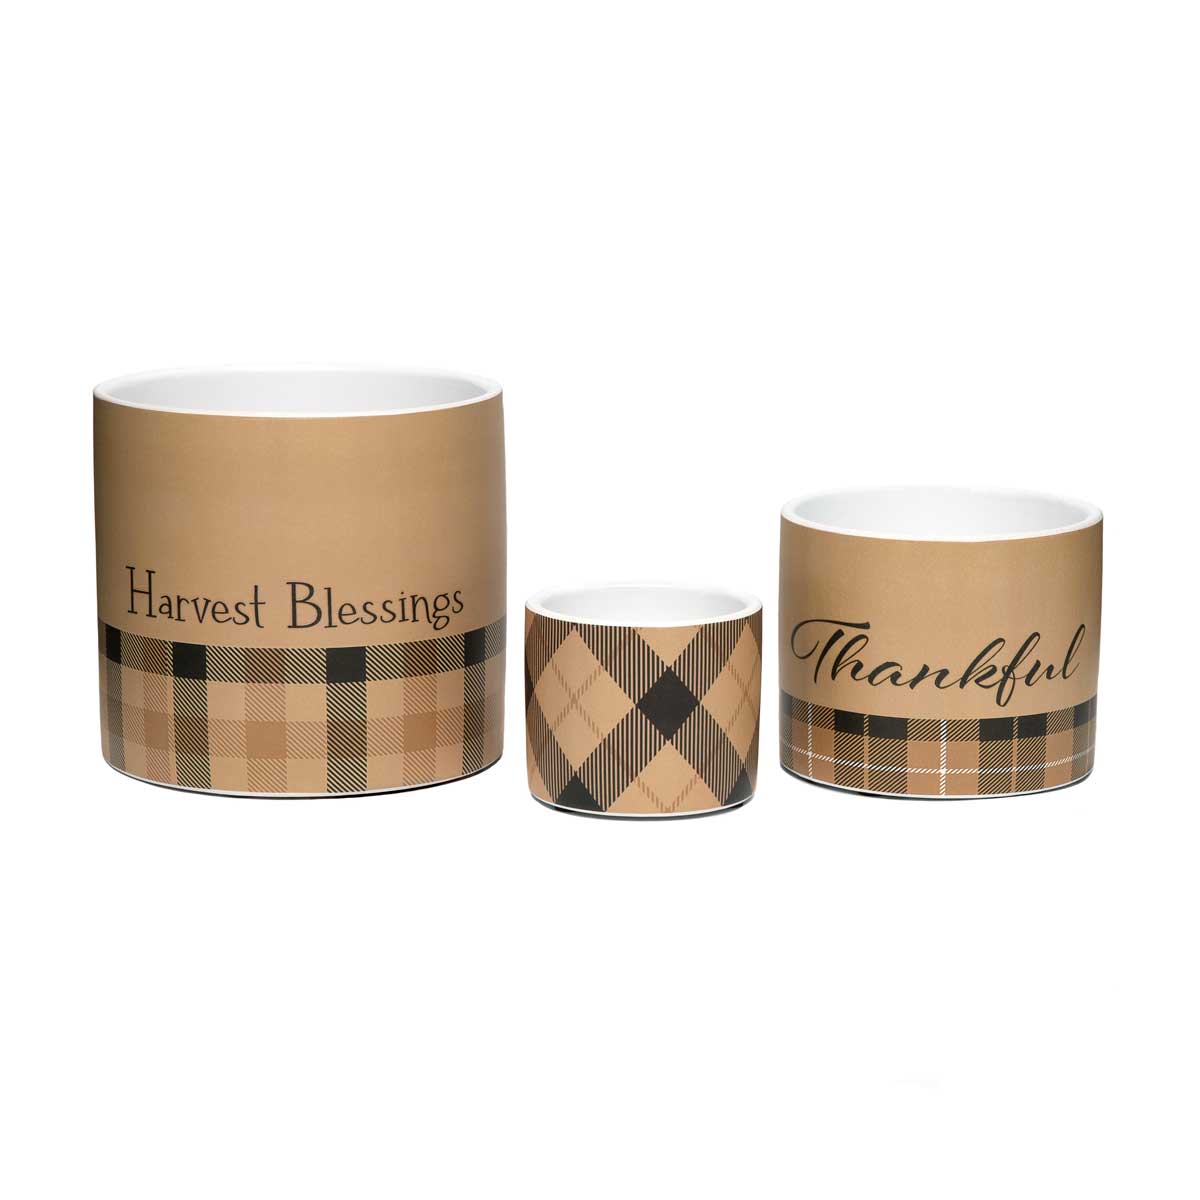 POT HARVEST BLESSINGS PLAID LARGE 5.25IN X 4.75IN BROWN/BLACK CE - Click Image to Close